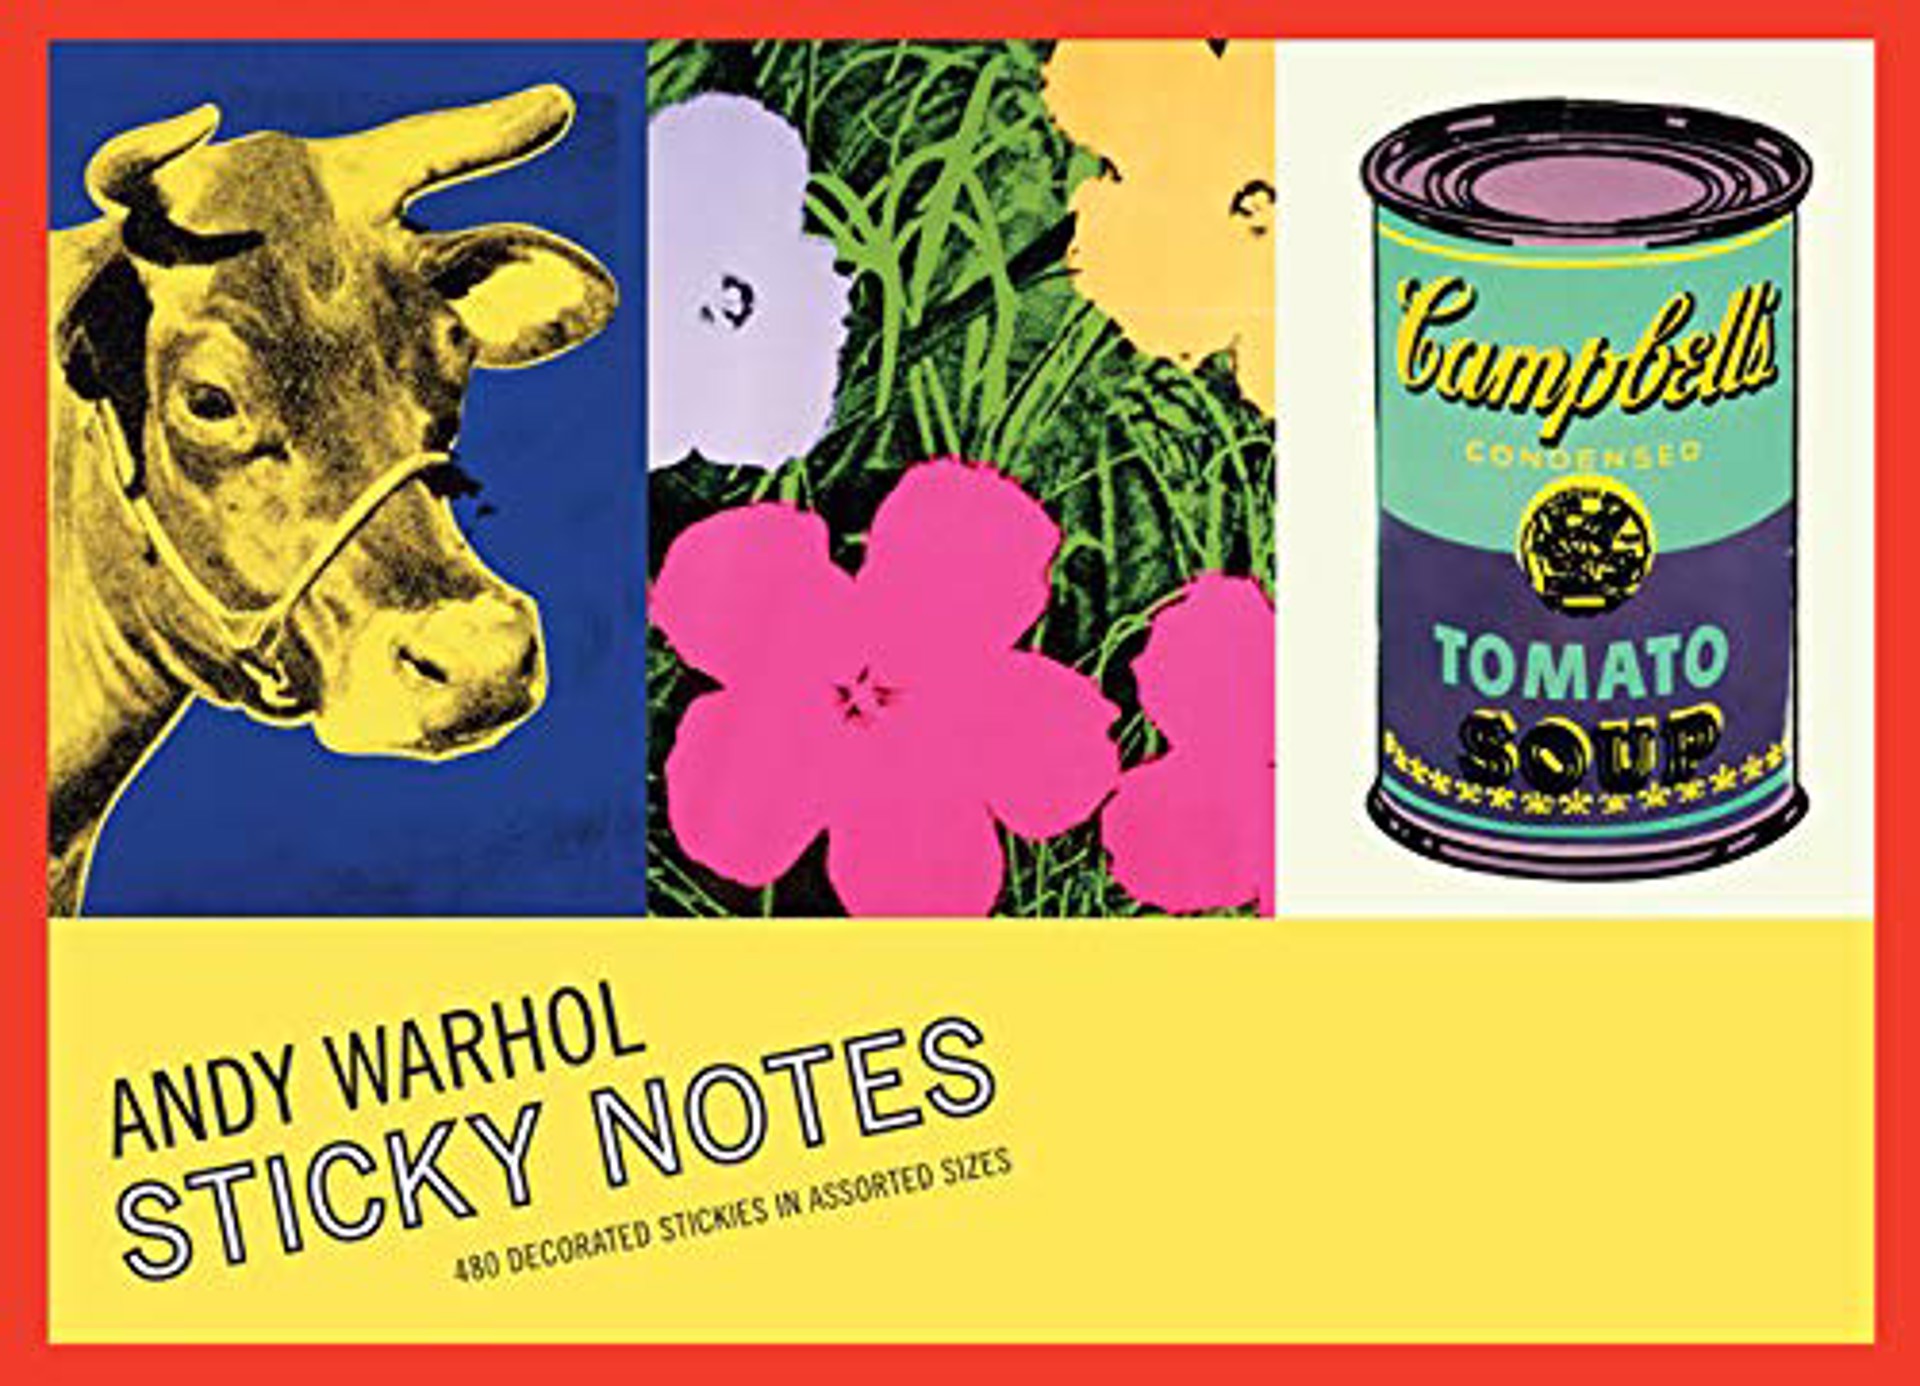 Warhol's Greatest Hits Sticky Notes by Andy Warhol